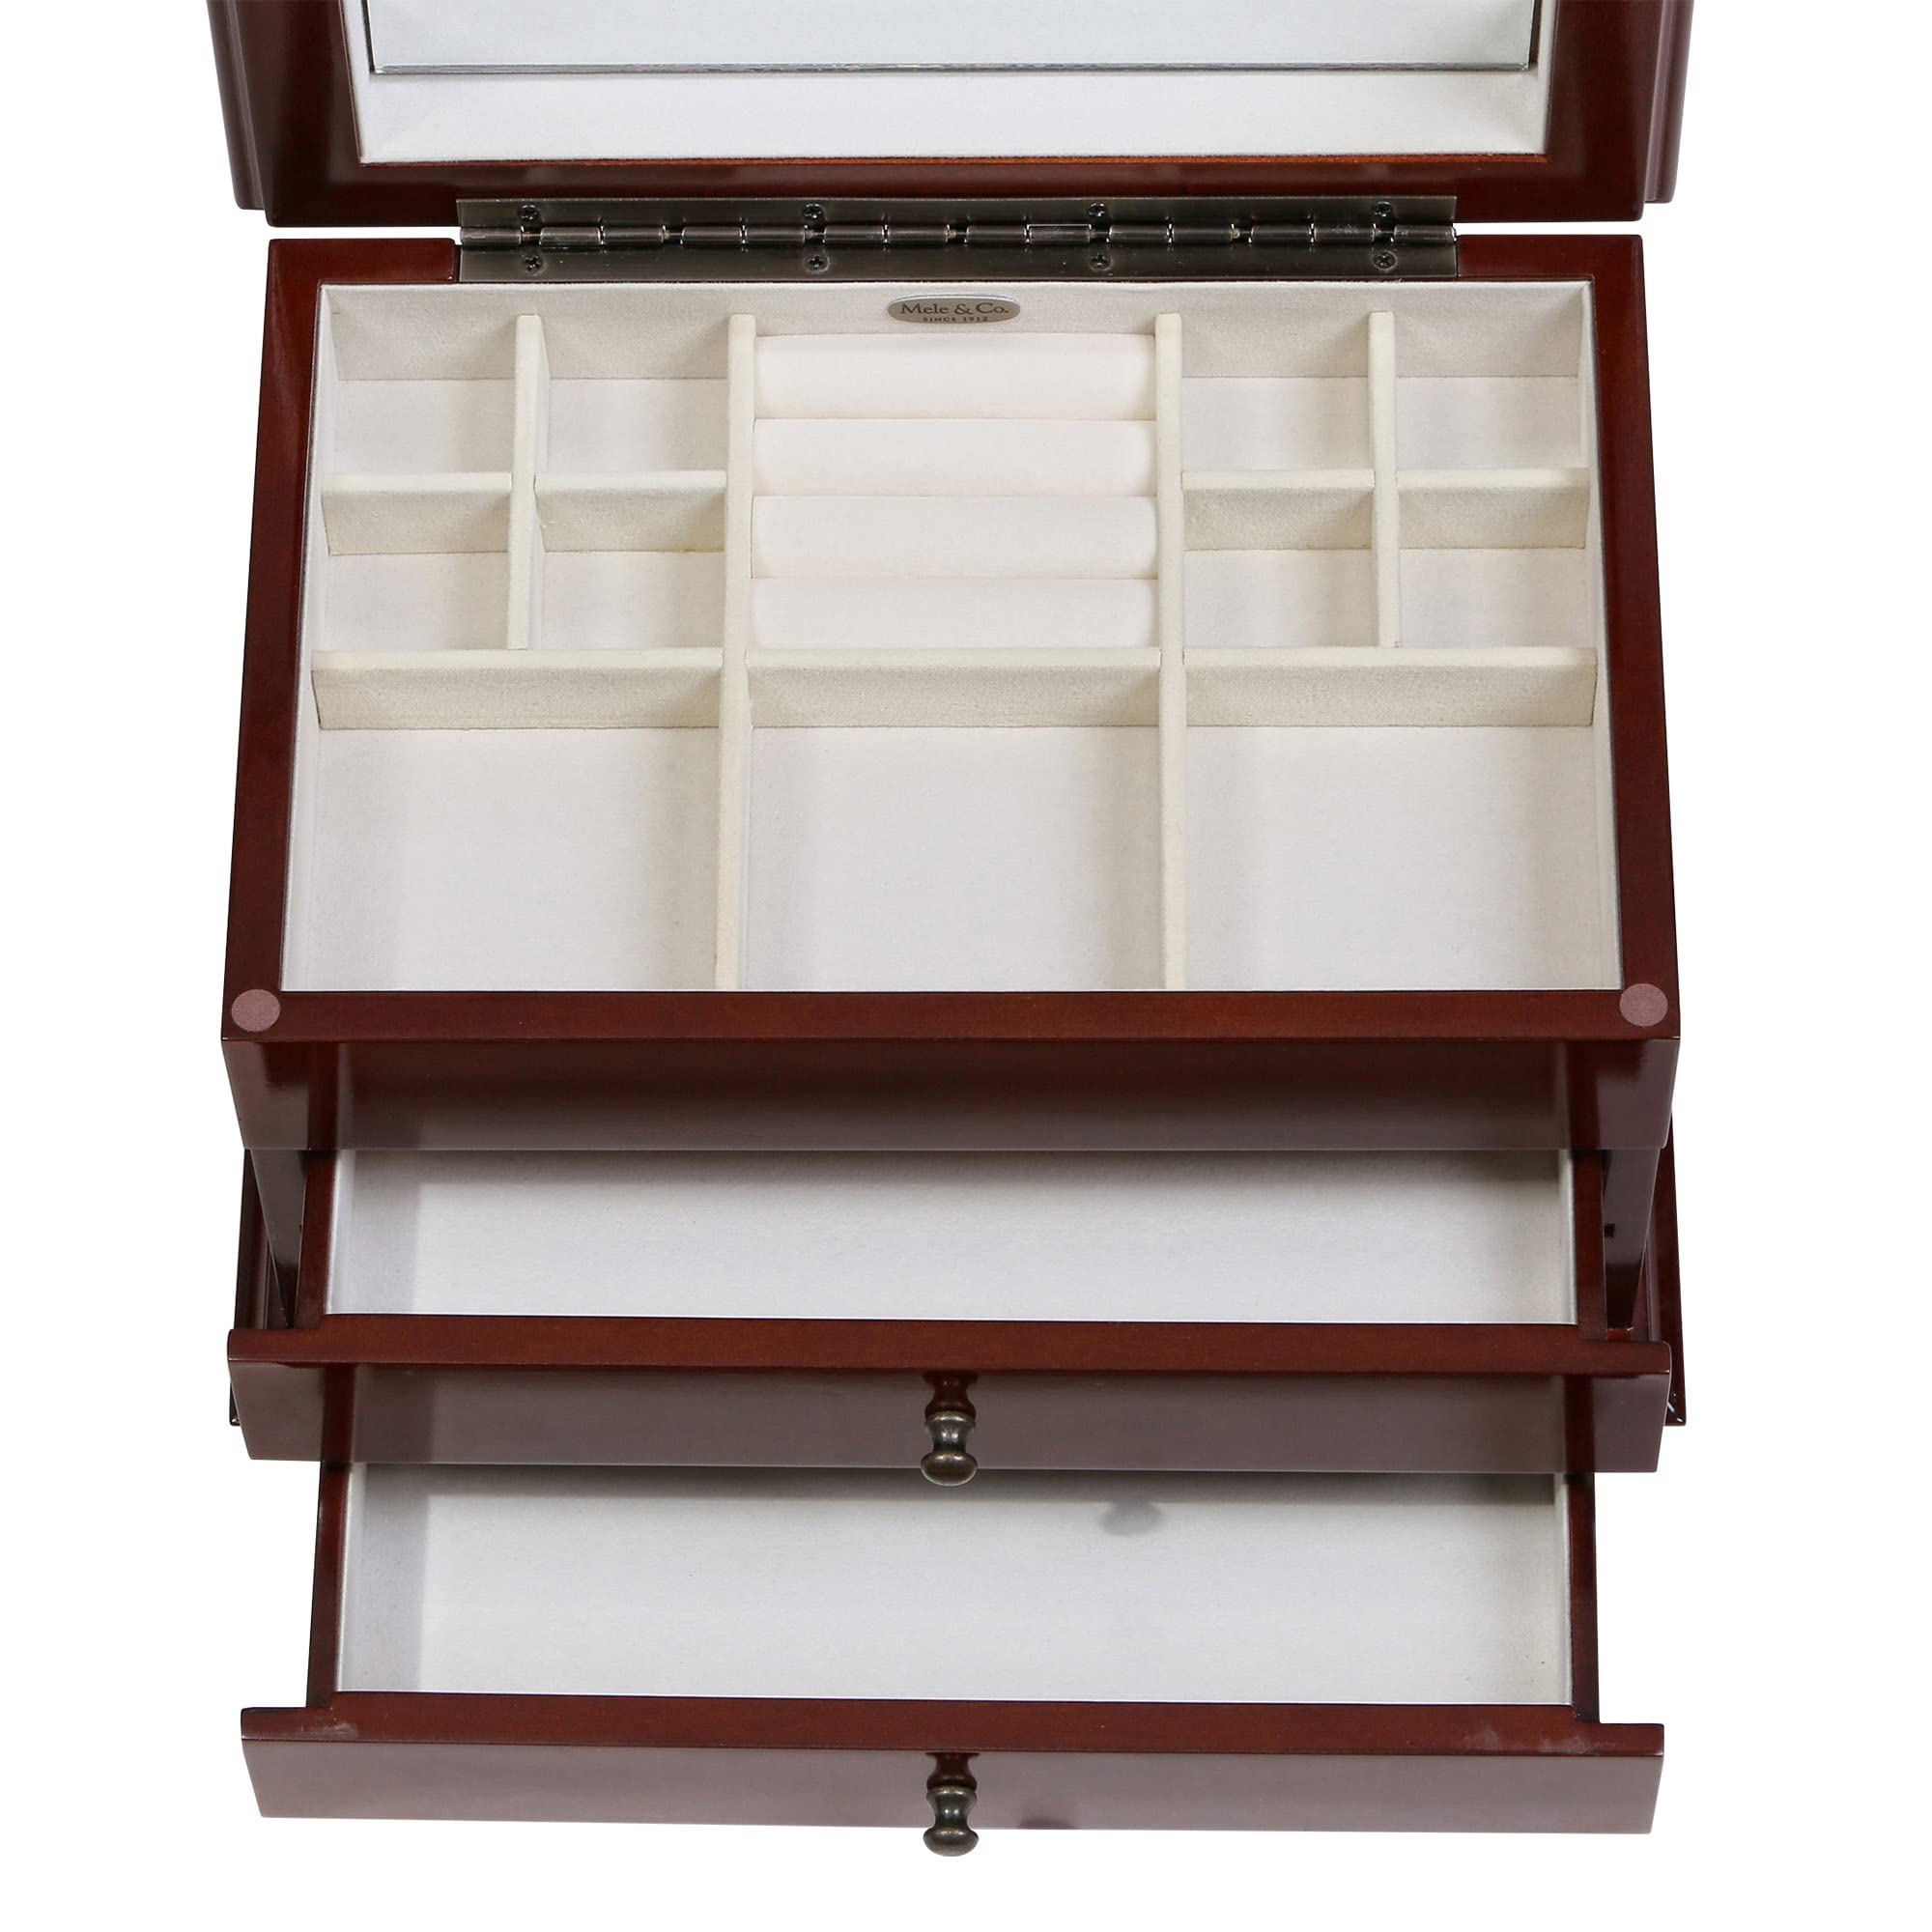 Mele & Co. Brayden Wooden Jewelry Box, Ring, Necklace, and Earring Organizer